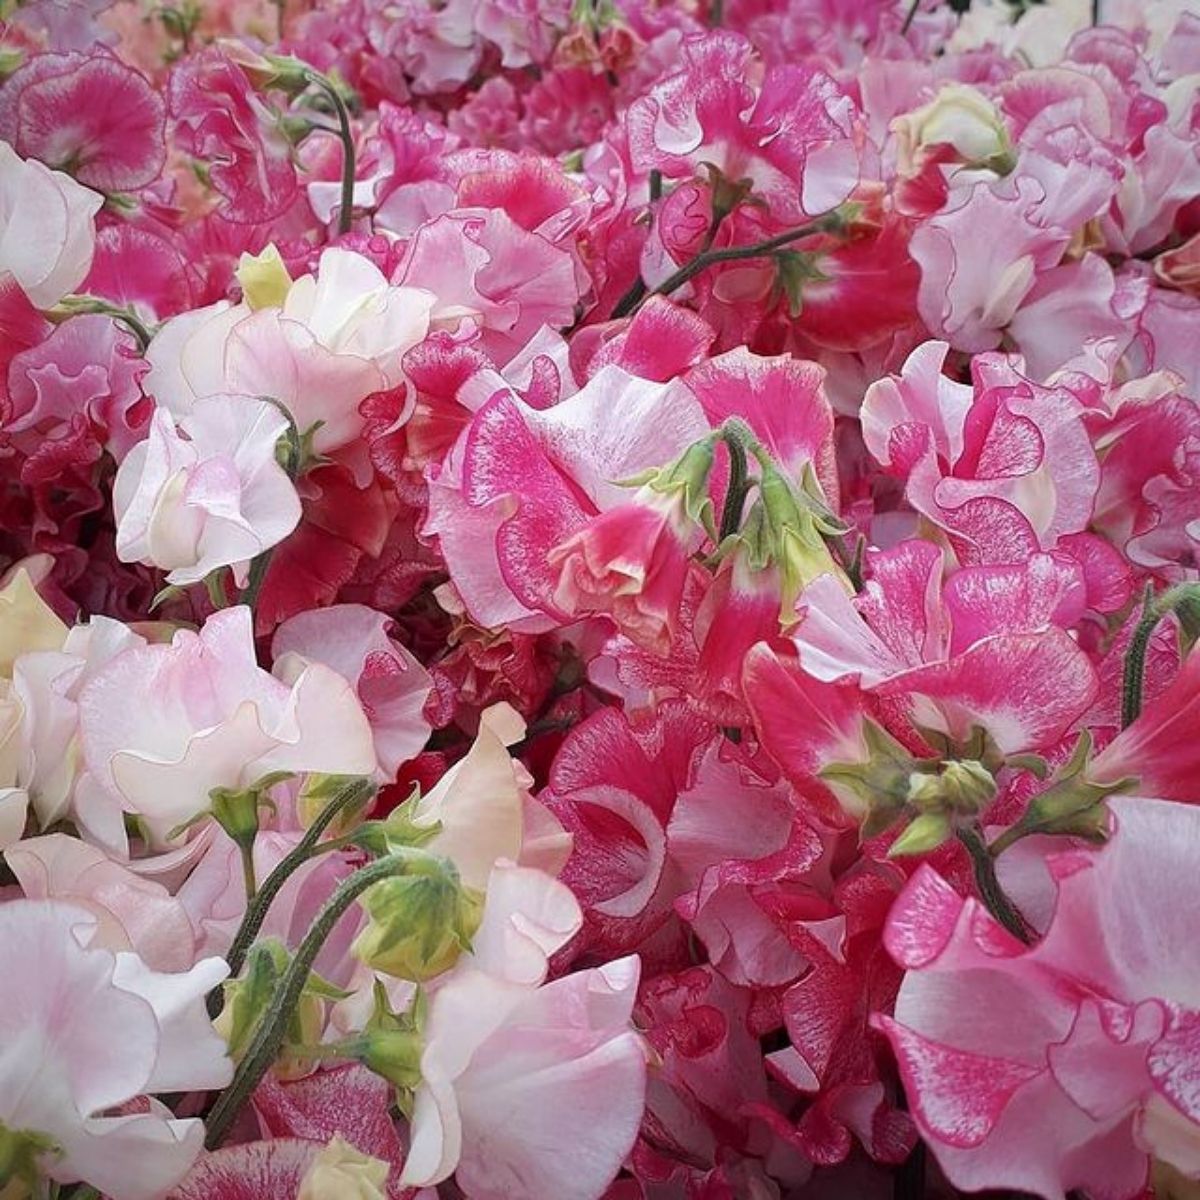 The Scent of Lathyrus Odoratus Blows You Away - Article on Thursd